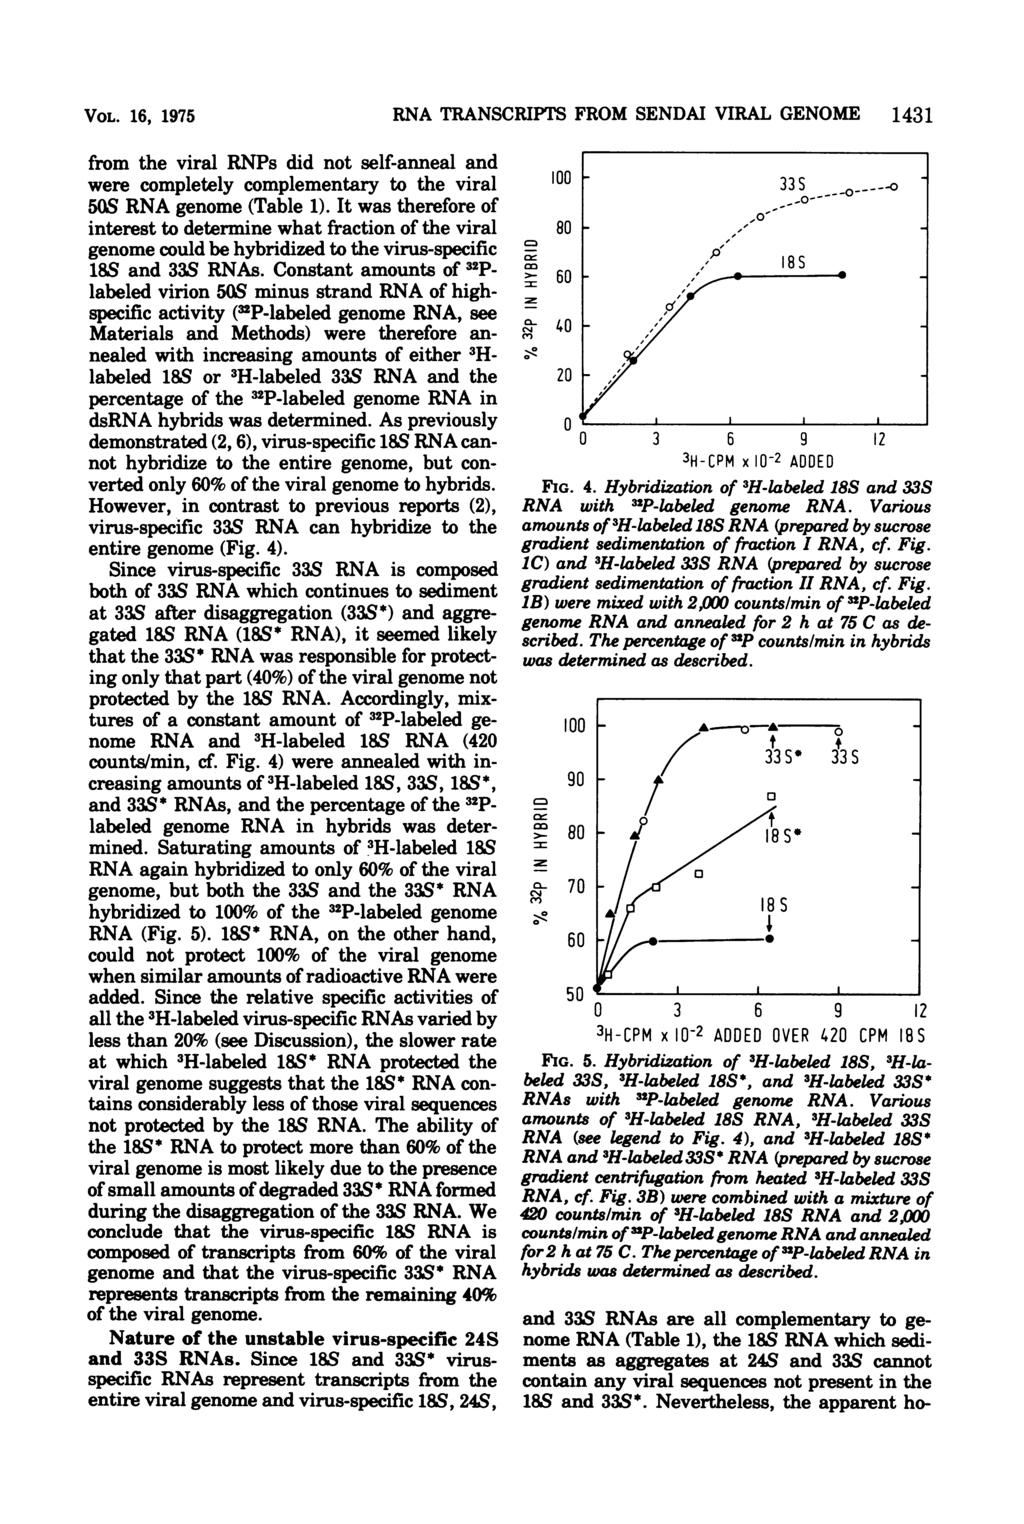 VOL. 16, 1975 RNA TRANSCRIPTS FROM SENDAI VIRAL GENOME 1431 from the viral RNPs did not self-anneal and were completely complementary to the viral 50S RNA genome (Table 1).